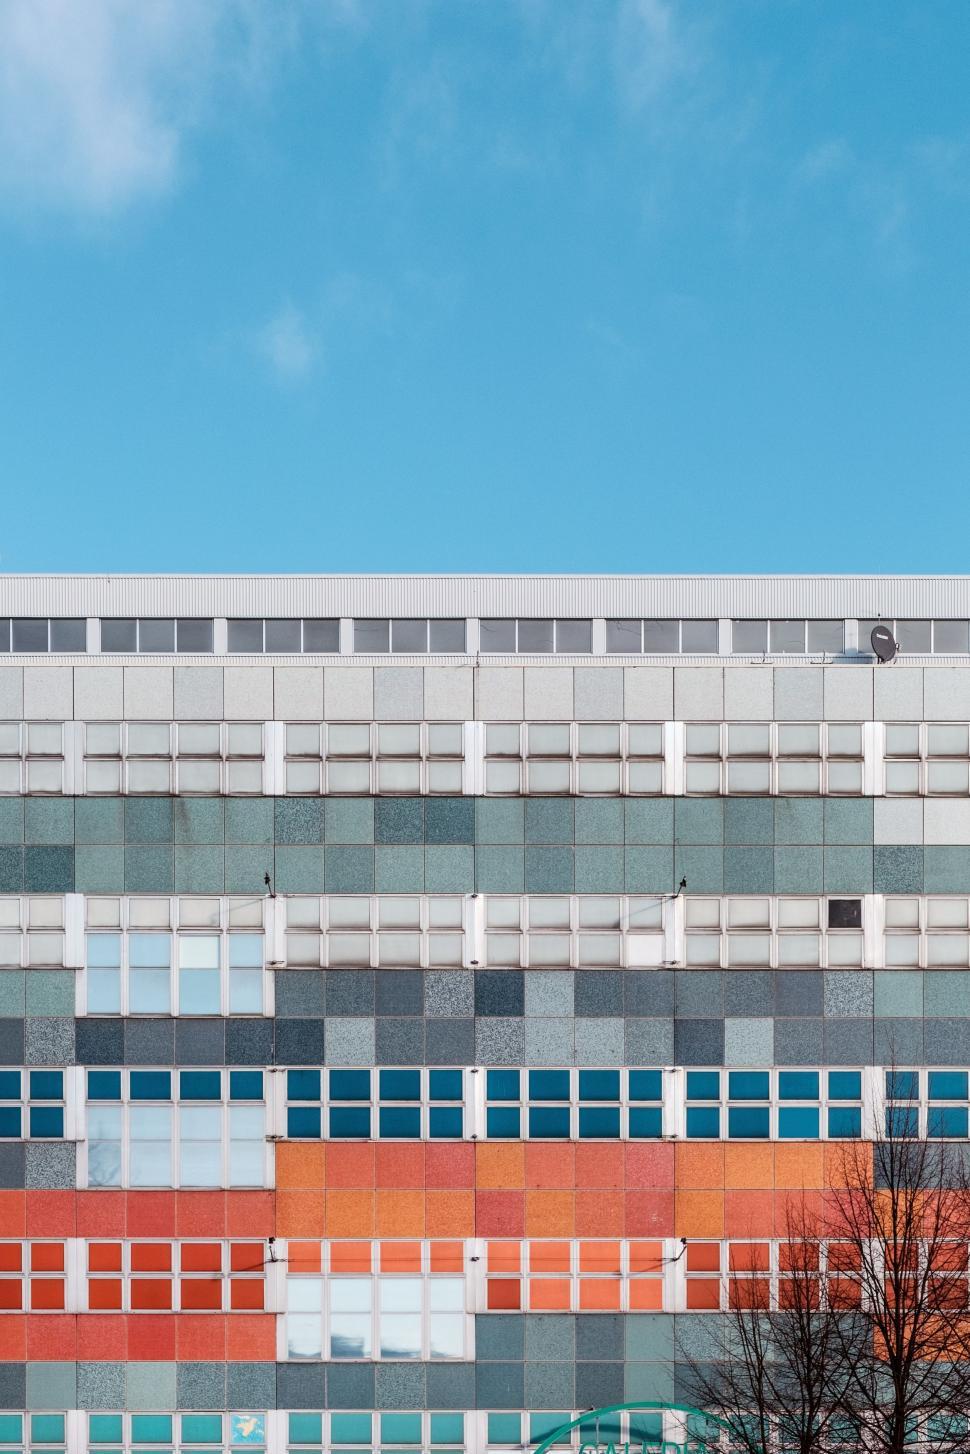 Free Image of Modern Office Building With Numerous Windows 